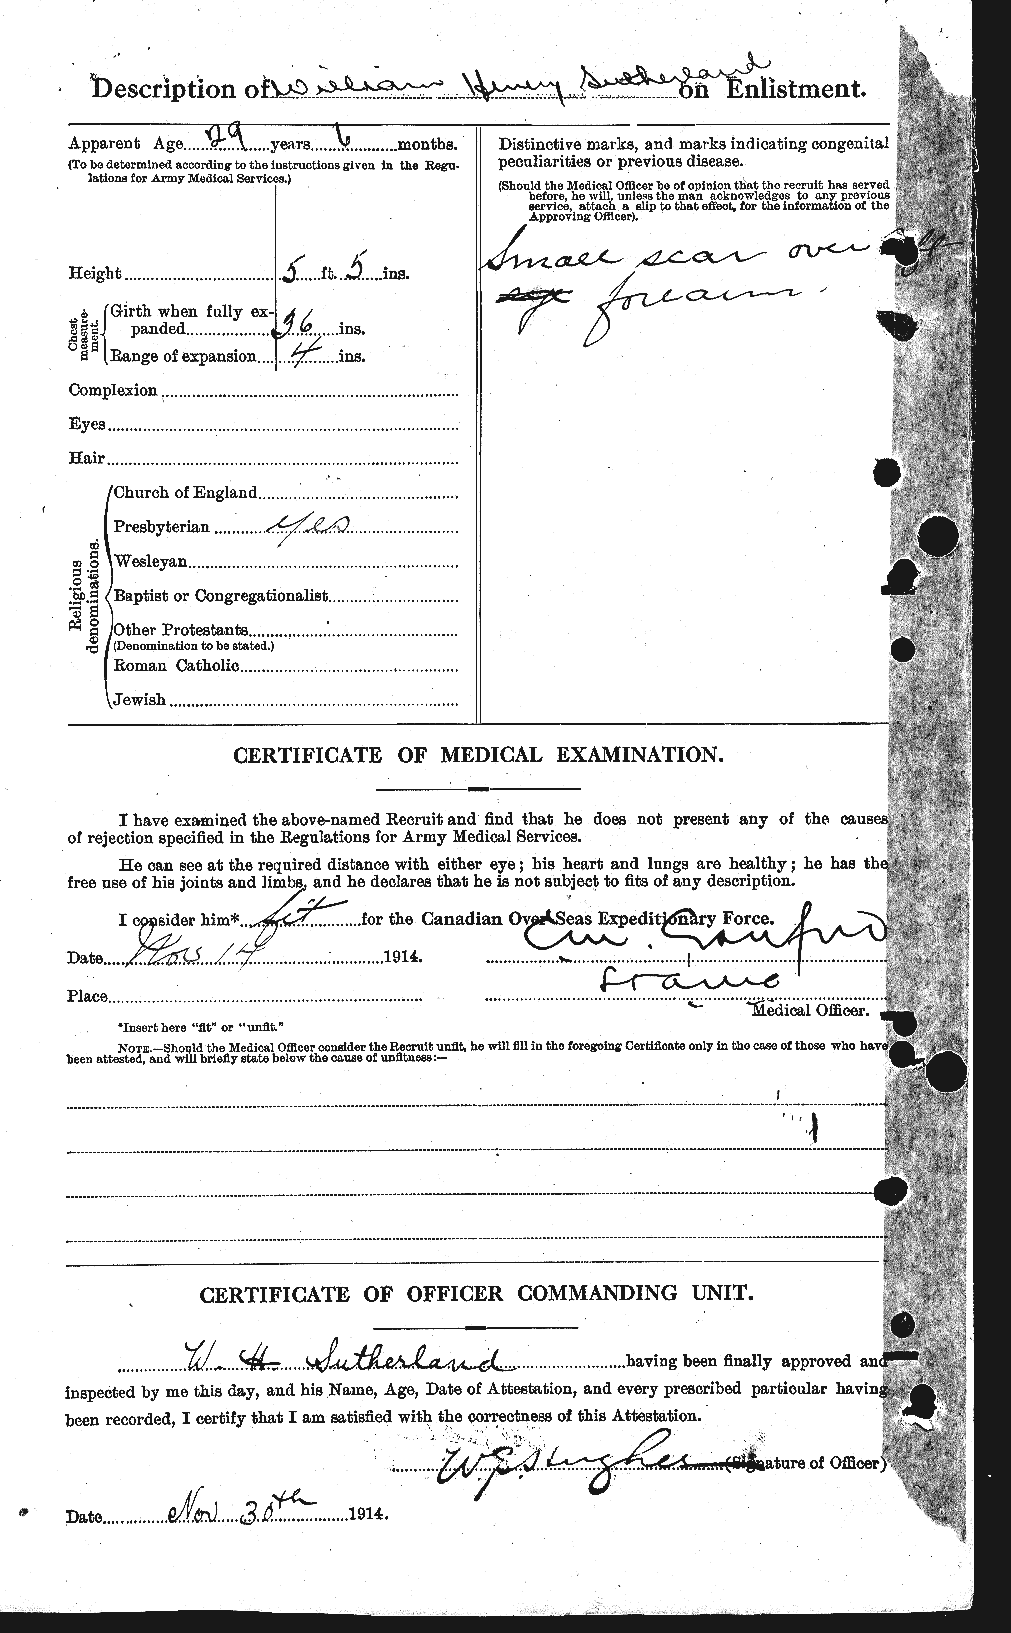 Personnel Records of the First World War - CEF 126425b